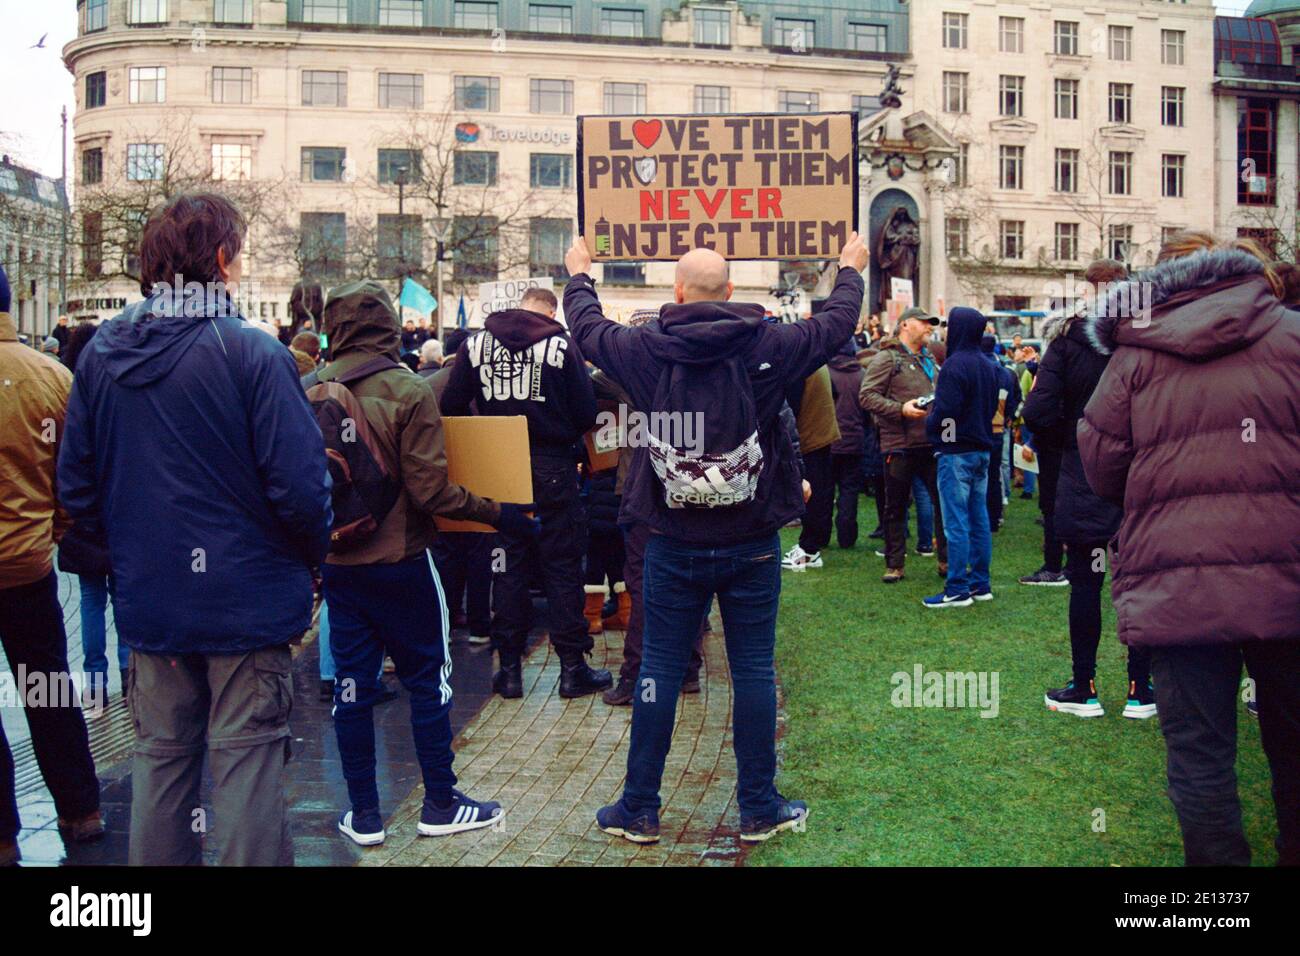 Manchester, UK - 5 December 2020: A man took part in a protest in Piccadilly Gardens holding up an anti-vaccine slogan Stock Photo